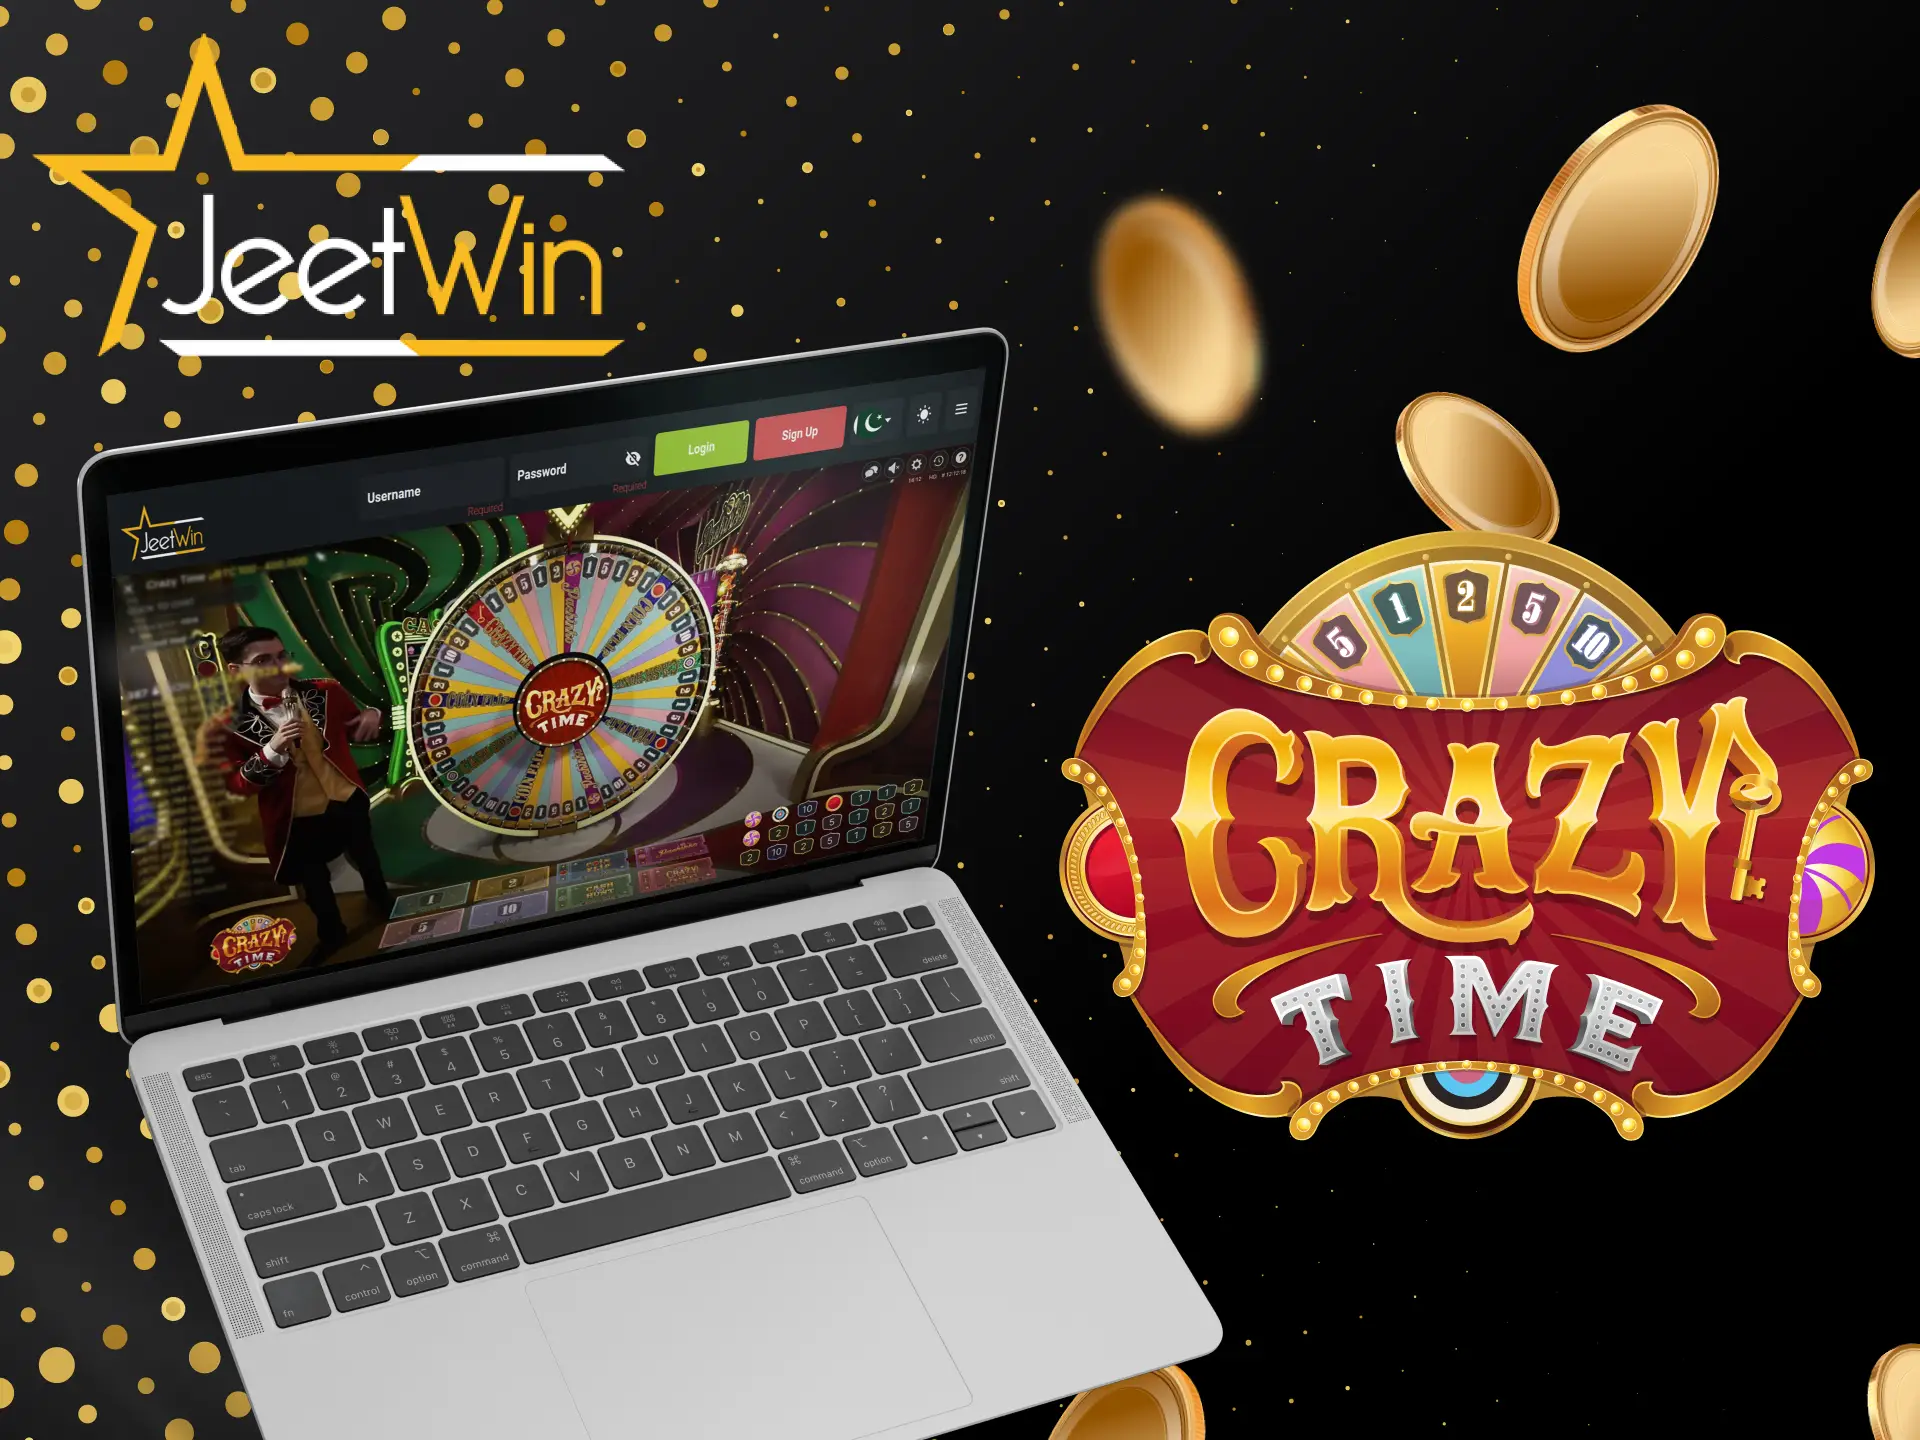 Feel the excitement of big wins with Crazy Time at JeetWin.